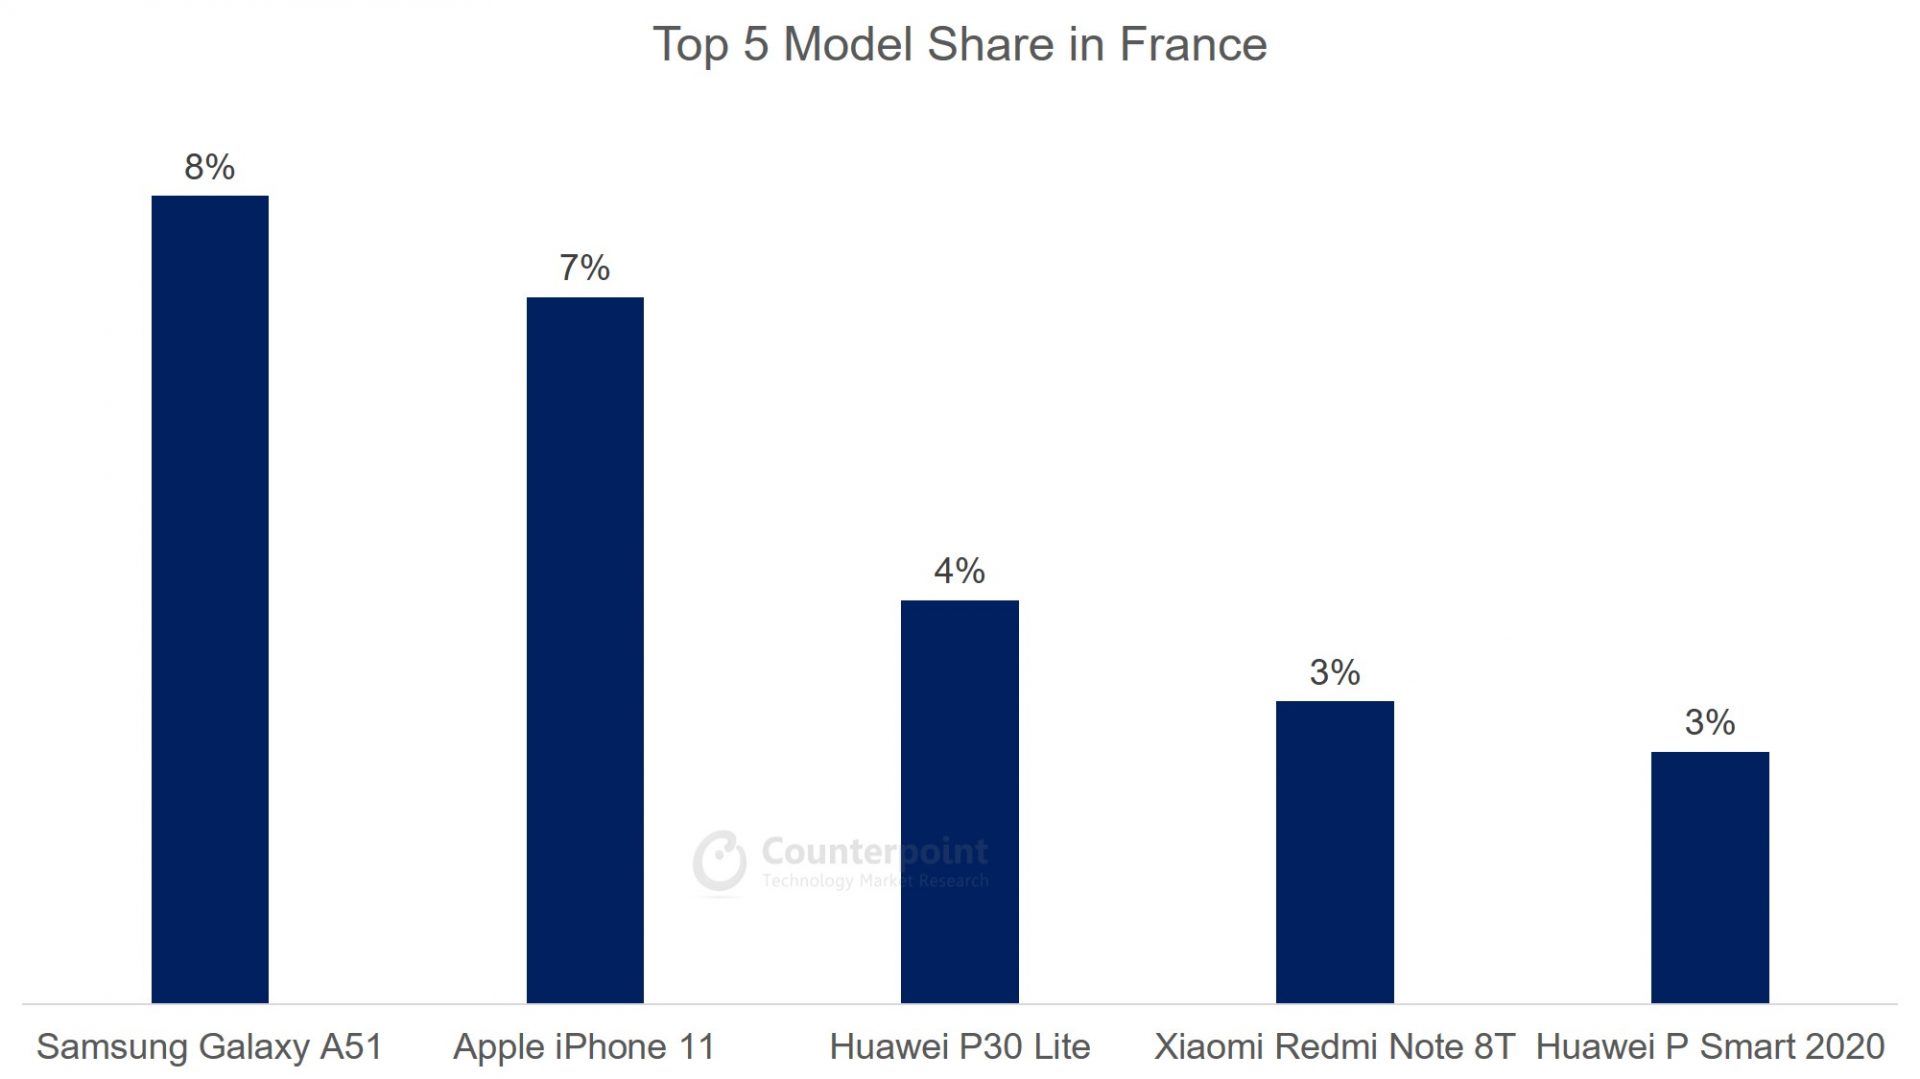 Counterpoint: (Apr 2020) Top 5 Smartphone Model Share in France